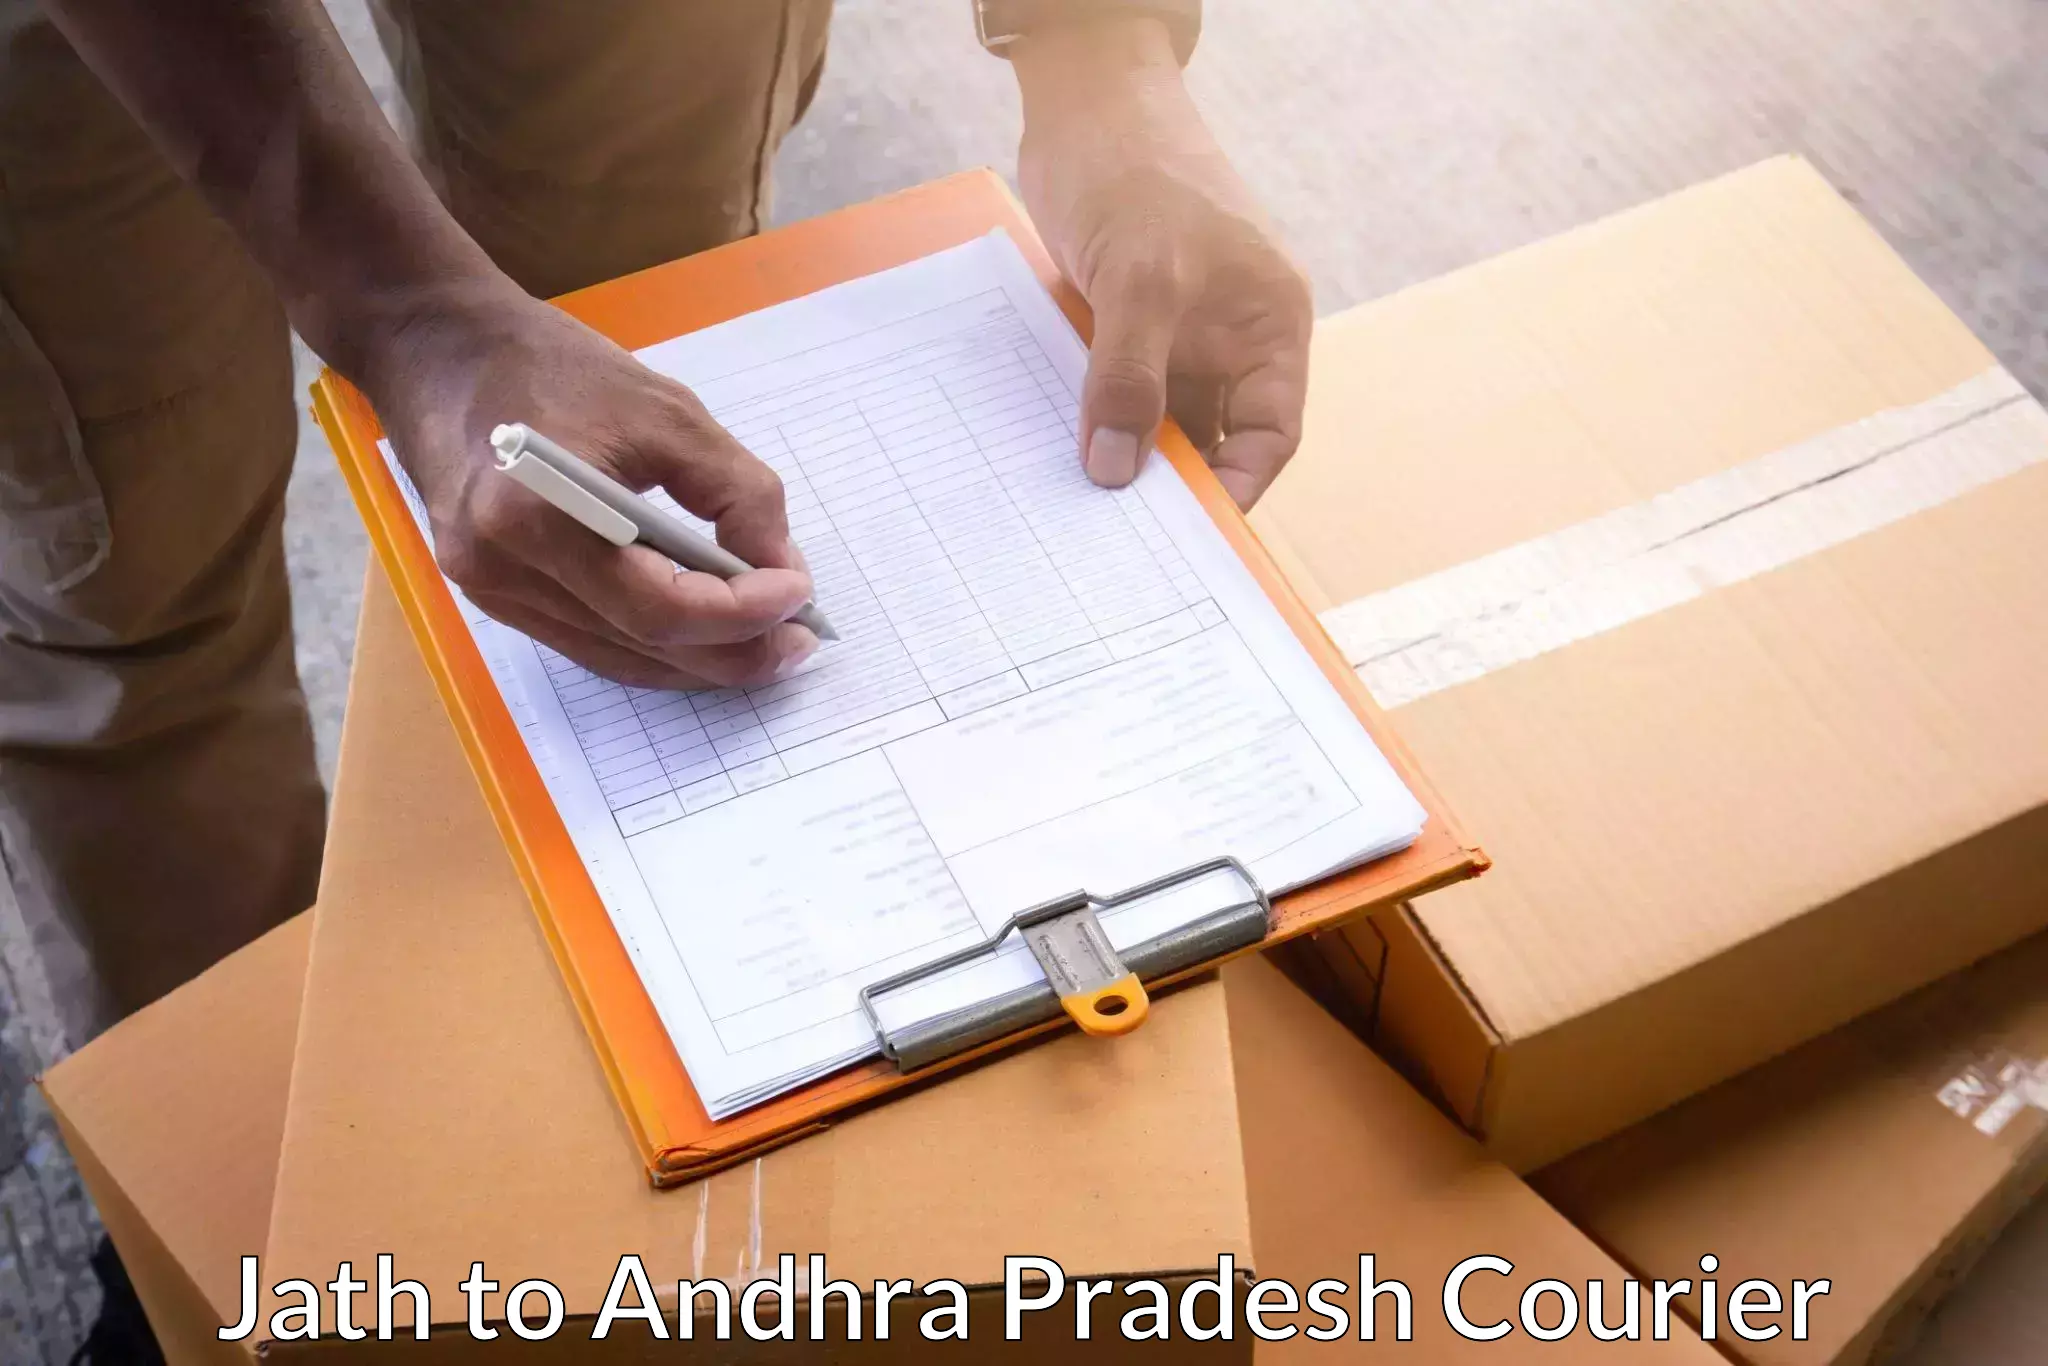 Reliable courier service Jath to Visakhapatnam